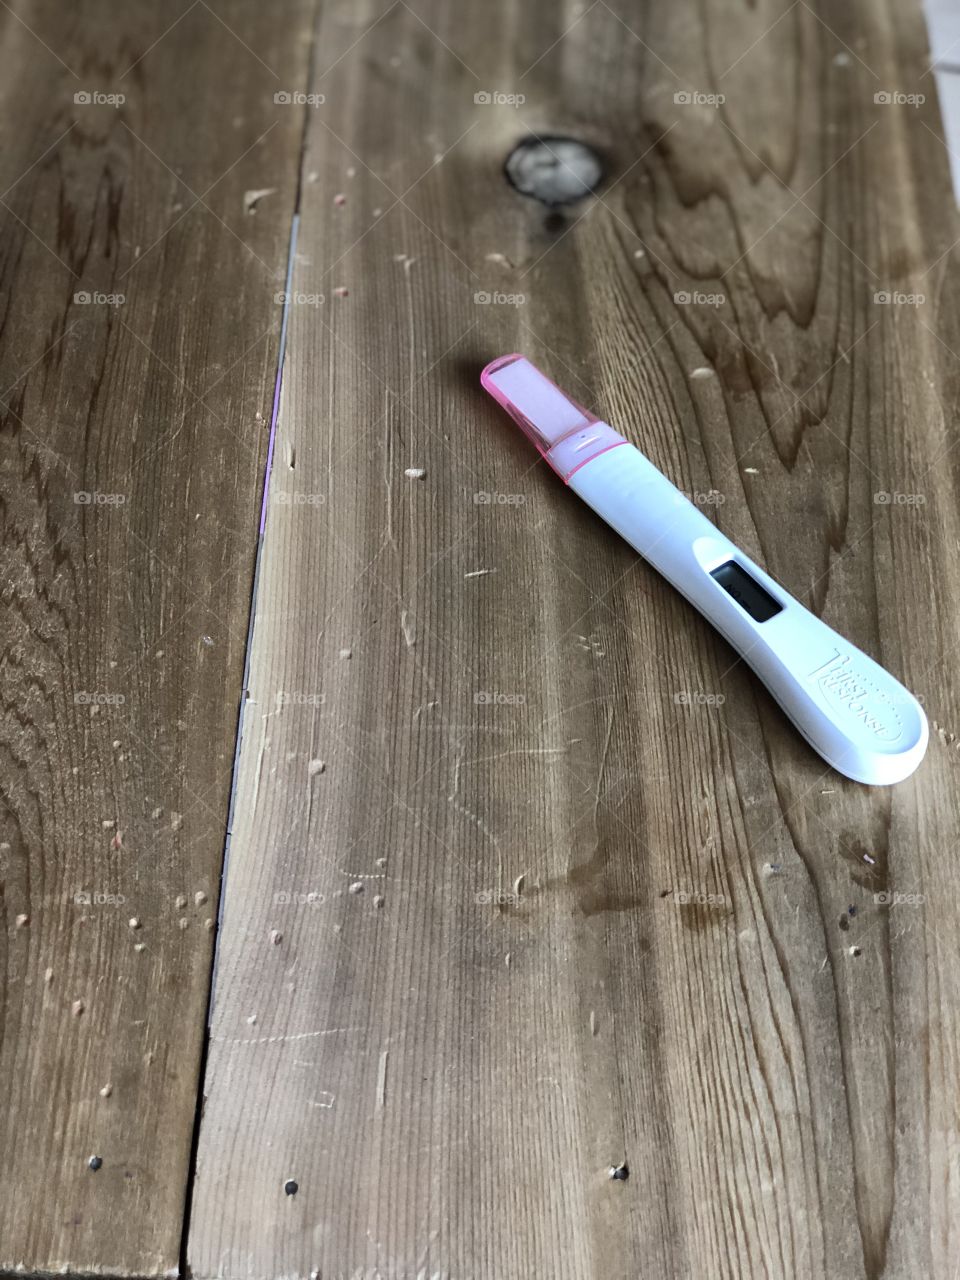 Pregnancy test pending results 